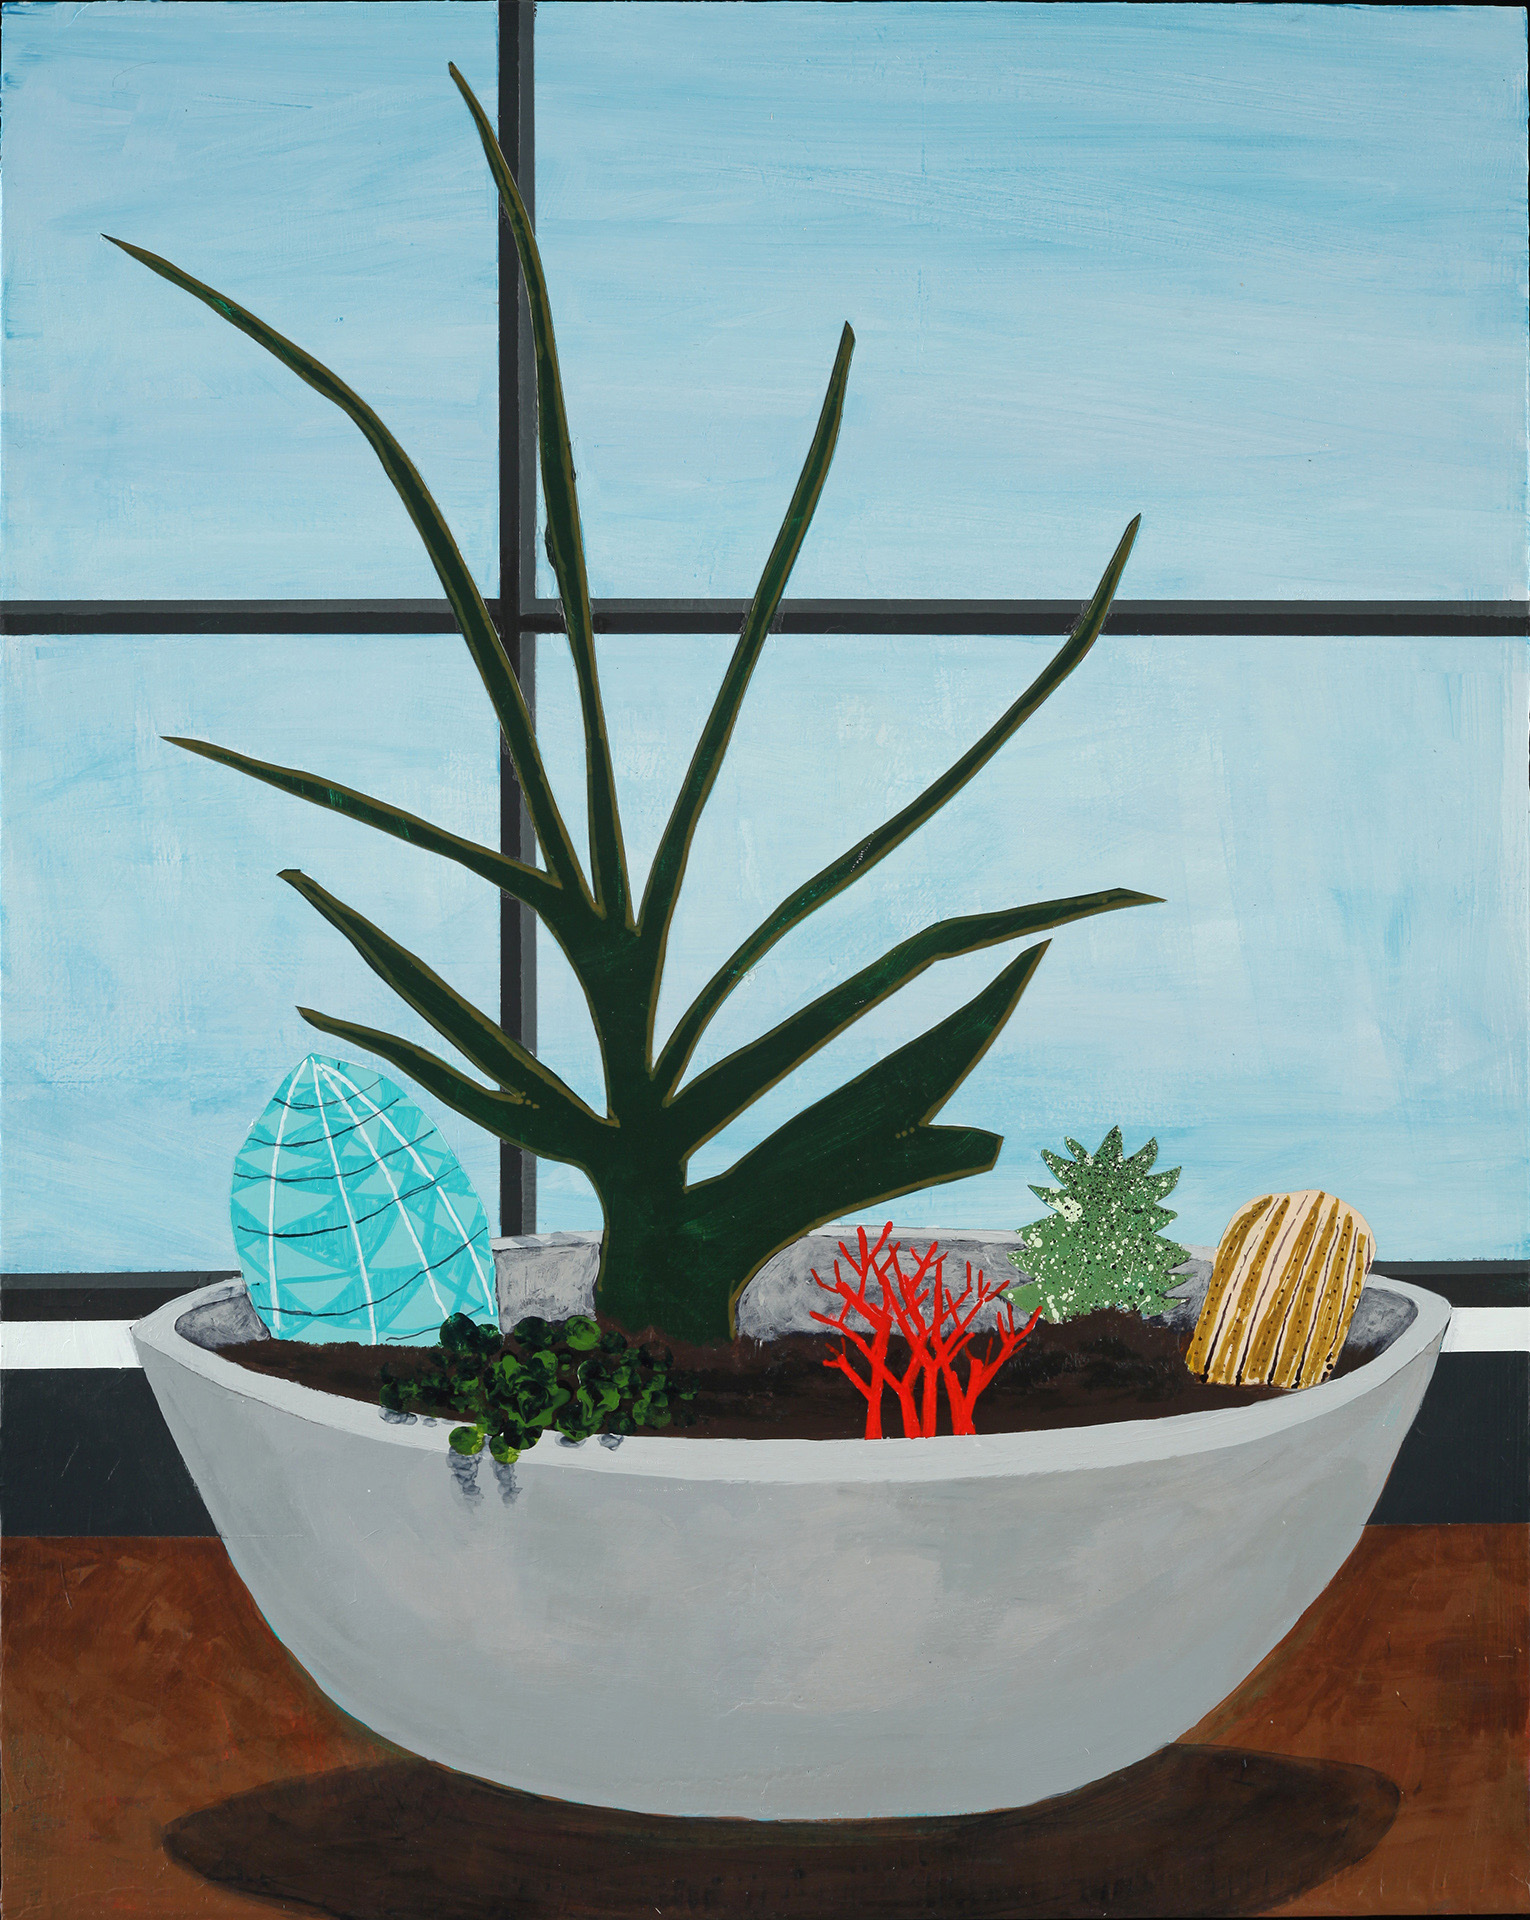 Latin Roots, 2018, Acrylic on panel, 20 x 16 inches